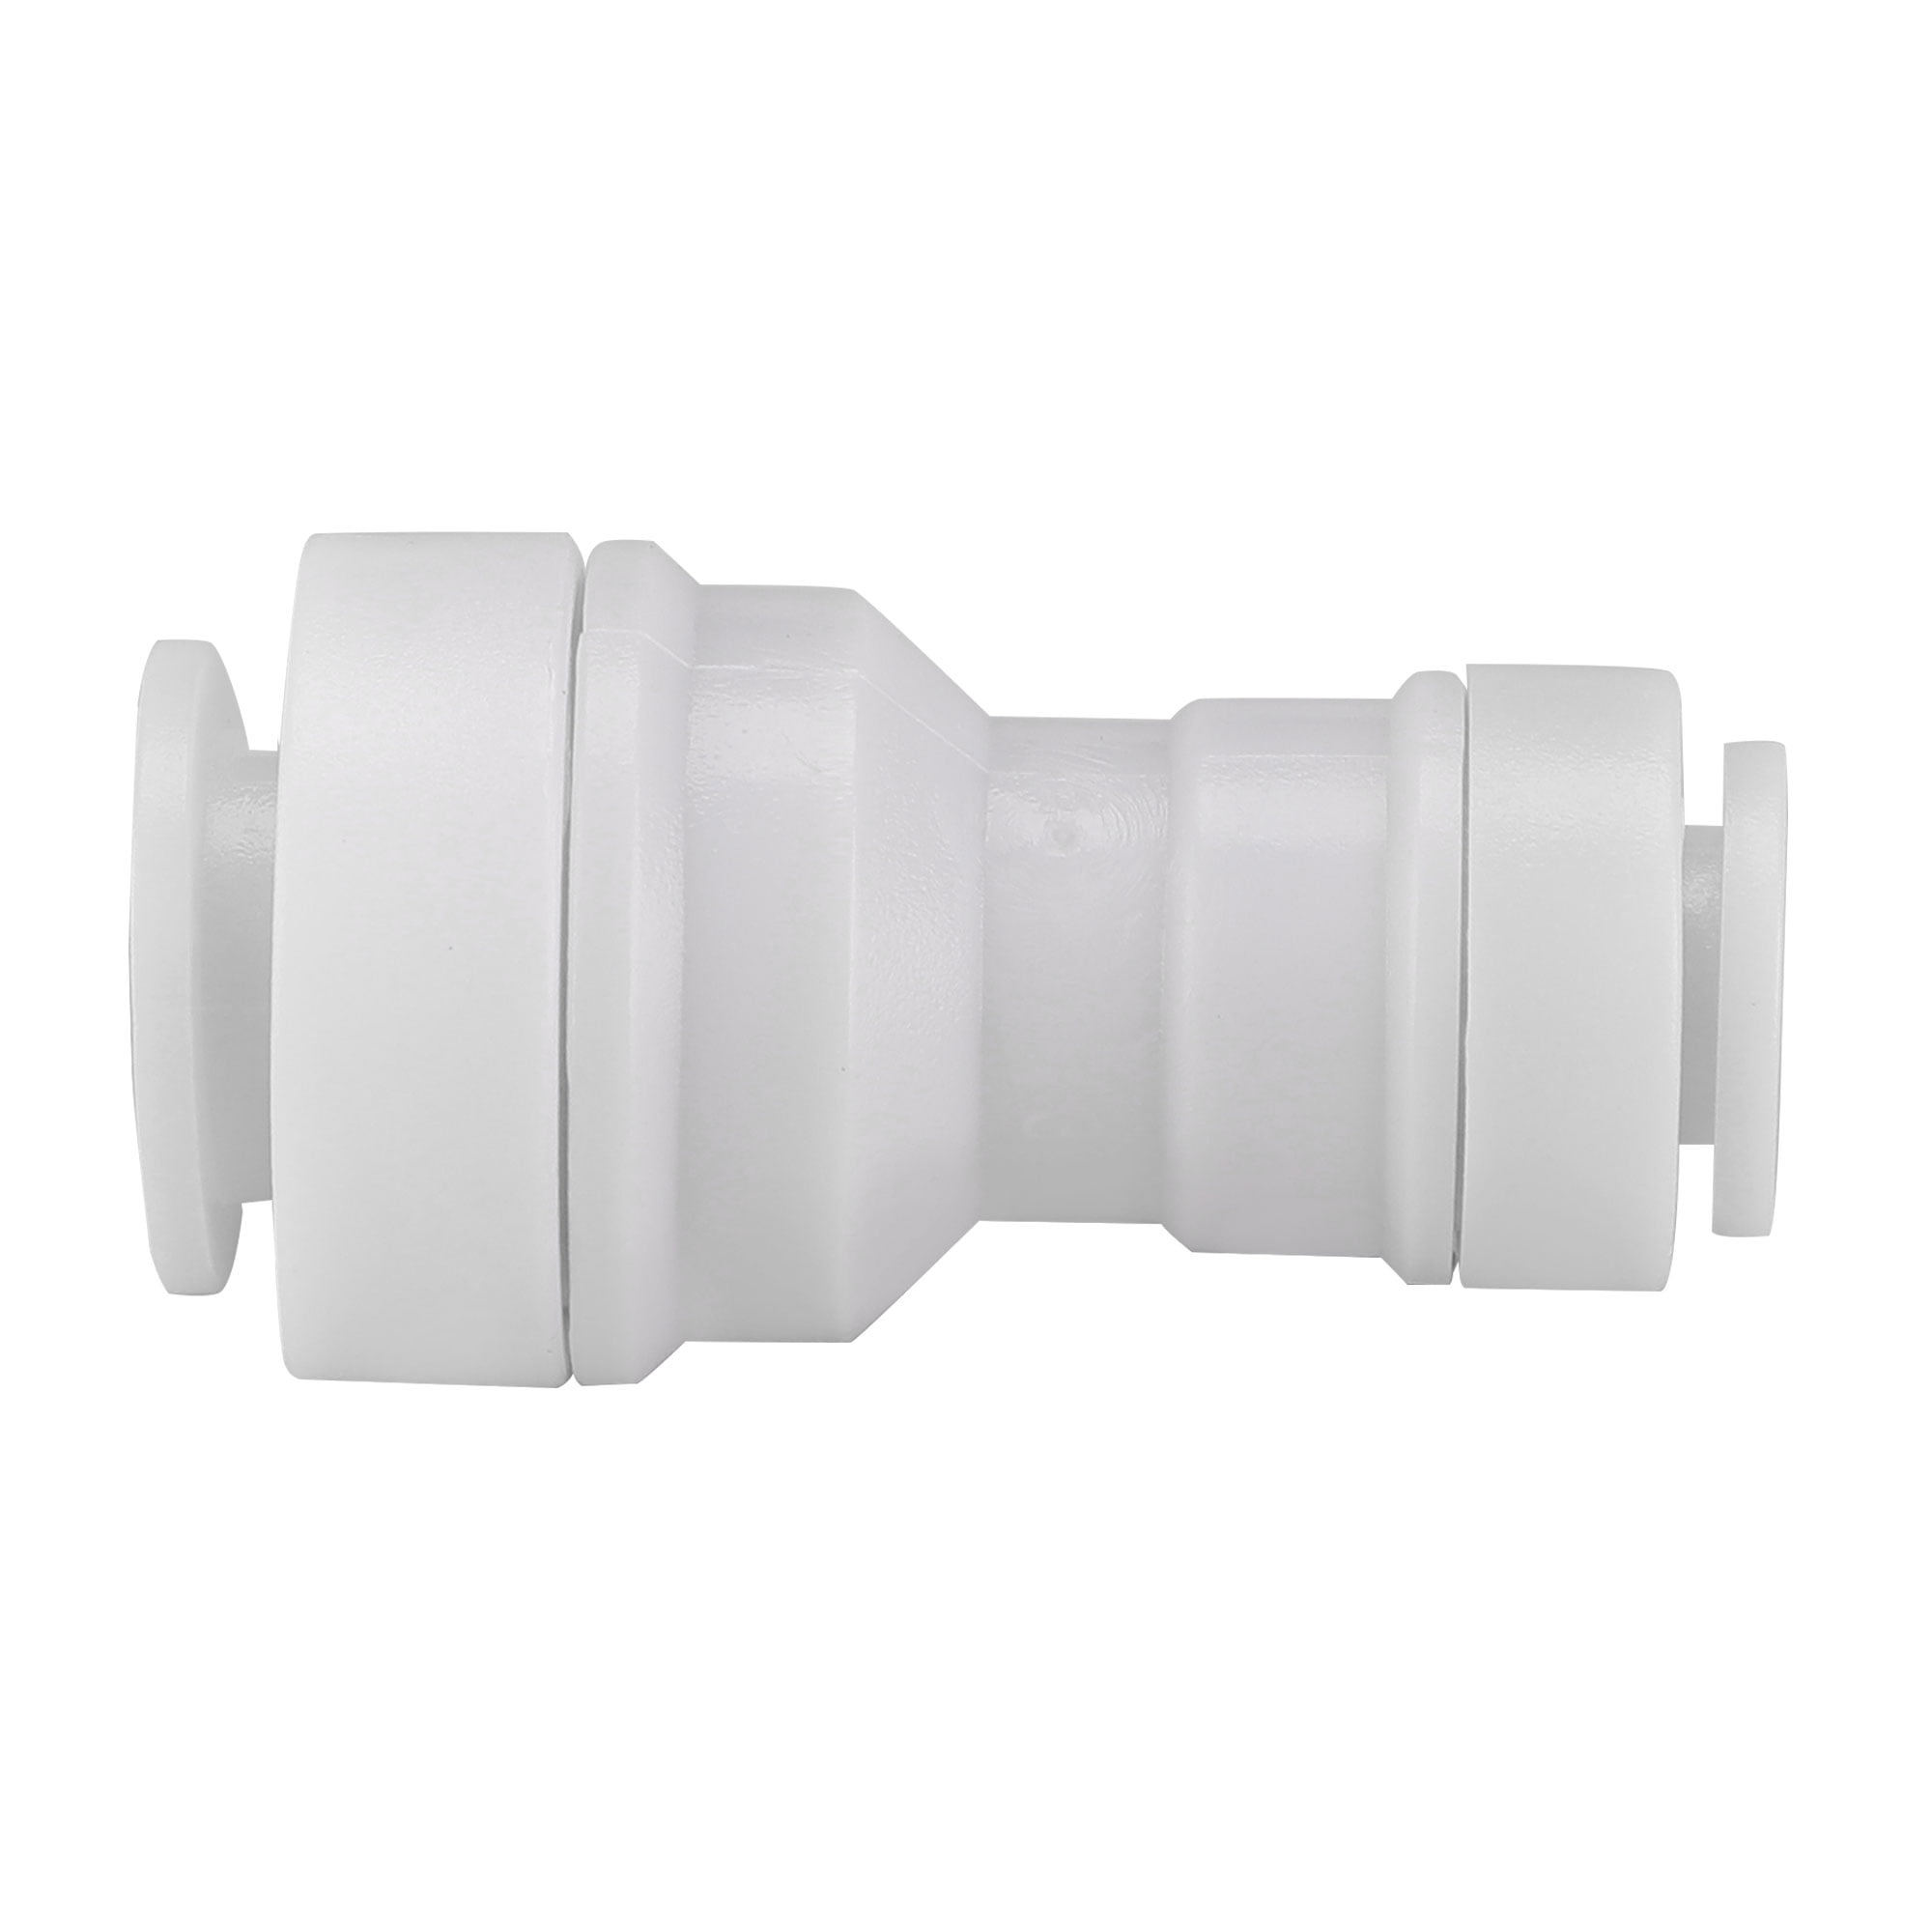 Quick Connect On/Off Valve for Water Supply Line Systems 3mm